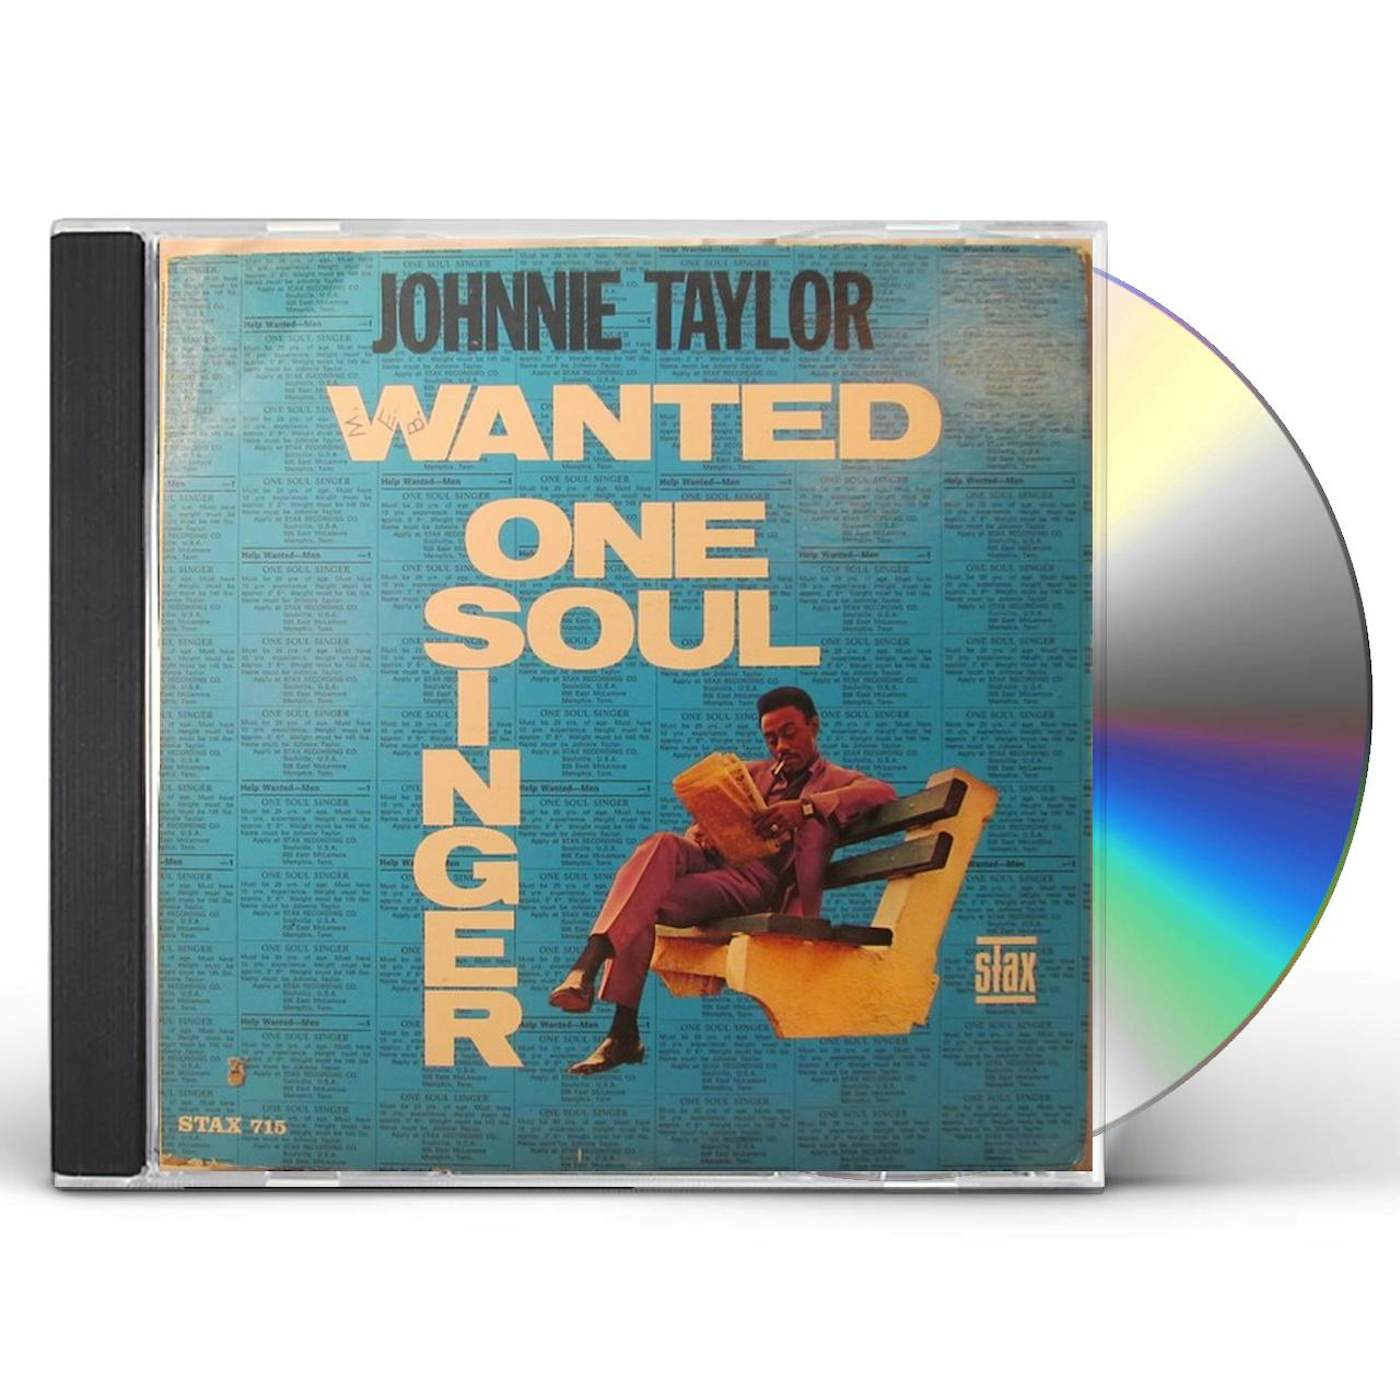 Johnnie Taylor WANTED: ONE SOUL SINGER CD